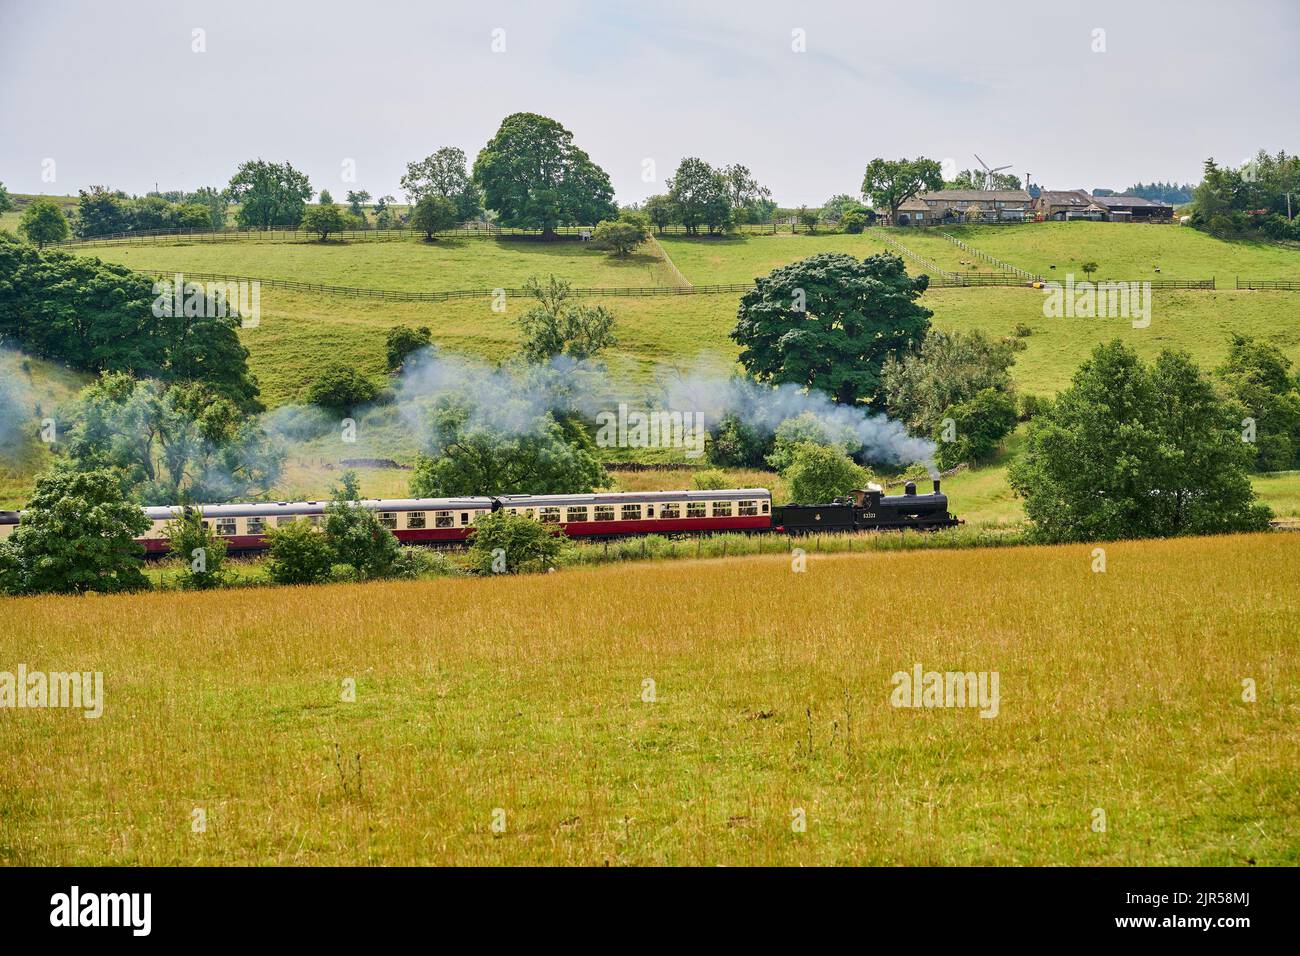 Steam train in the hills, on the Embsay Steam Railway, near Skipton, Yorkshire Dales, Northern England, UK Stock Photo